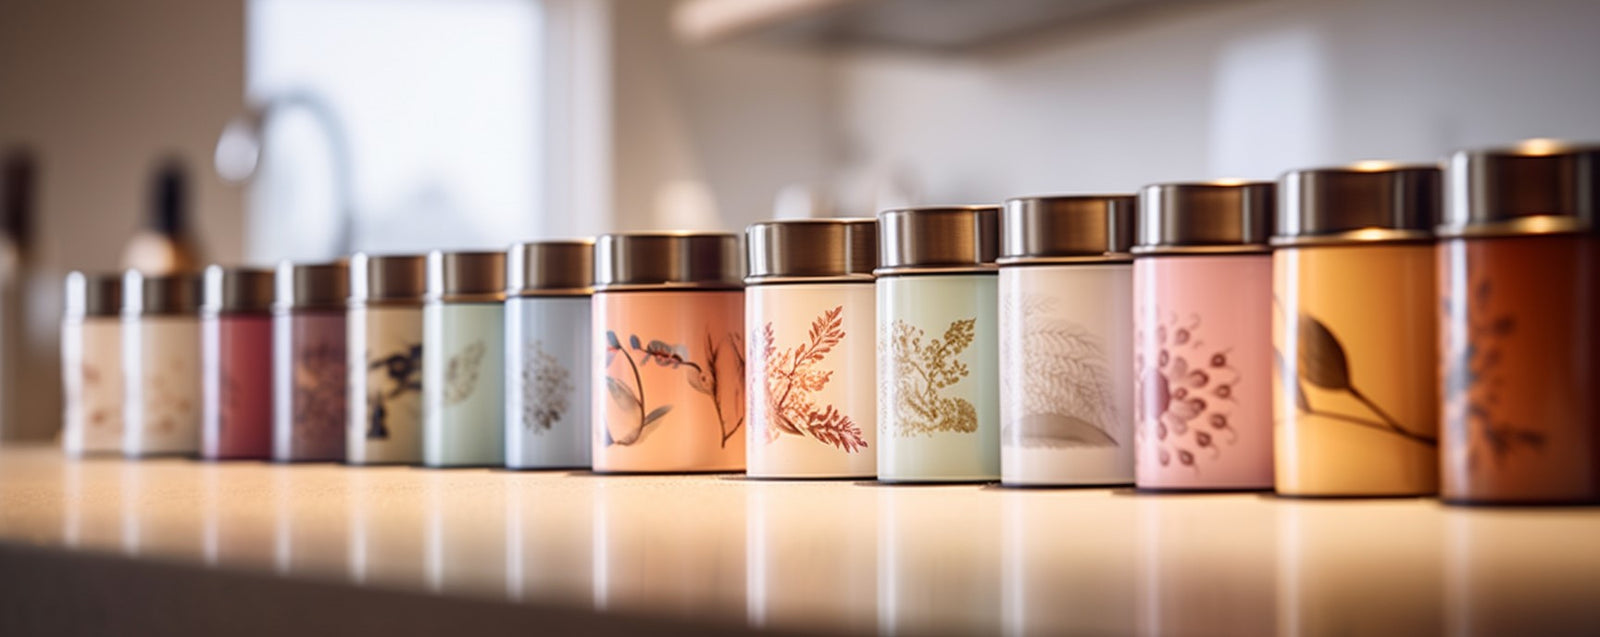 A row of sealed, air tight tea containers, sitting on a brightly lit countertop in a modern kitchen.